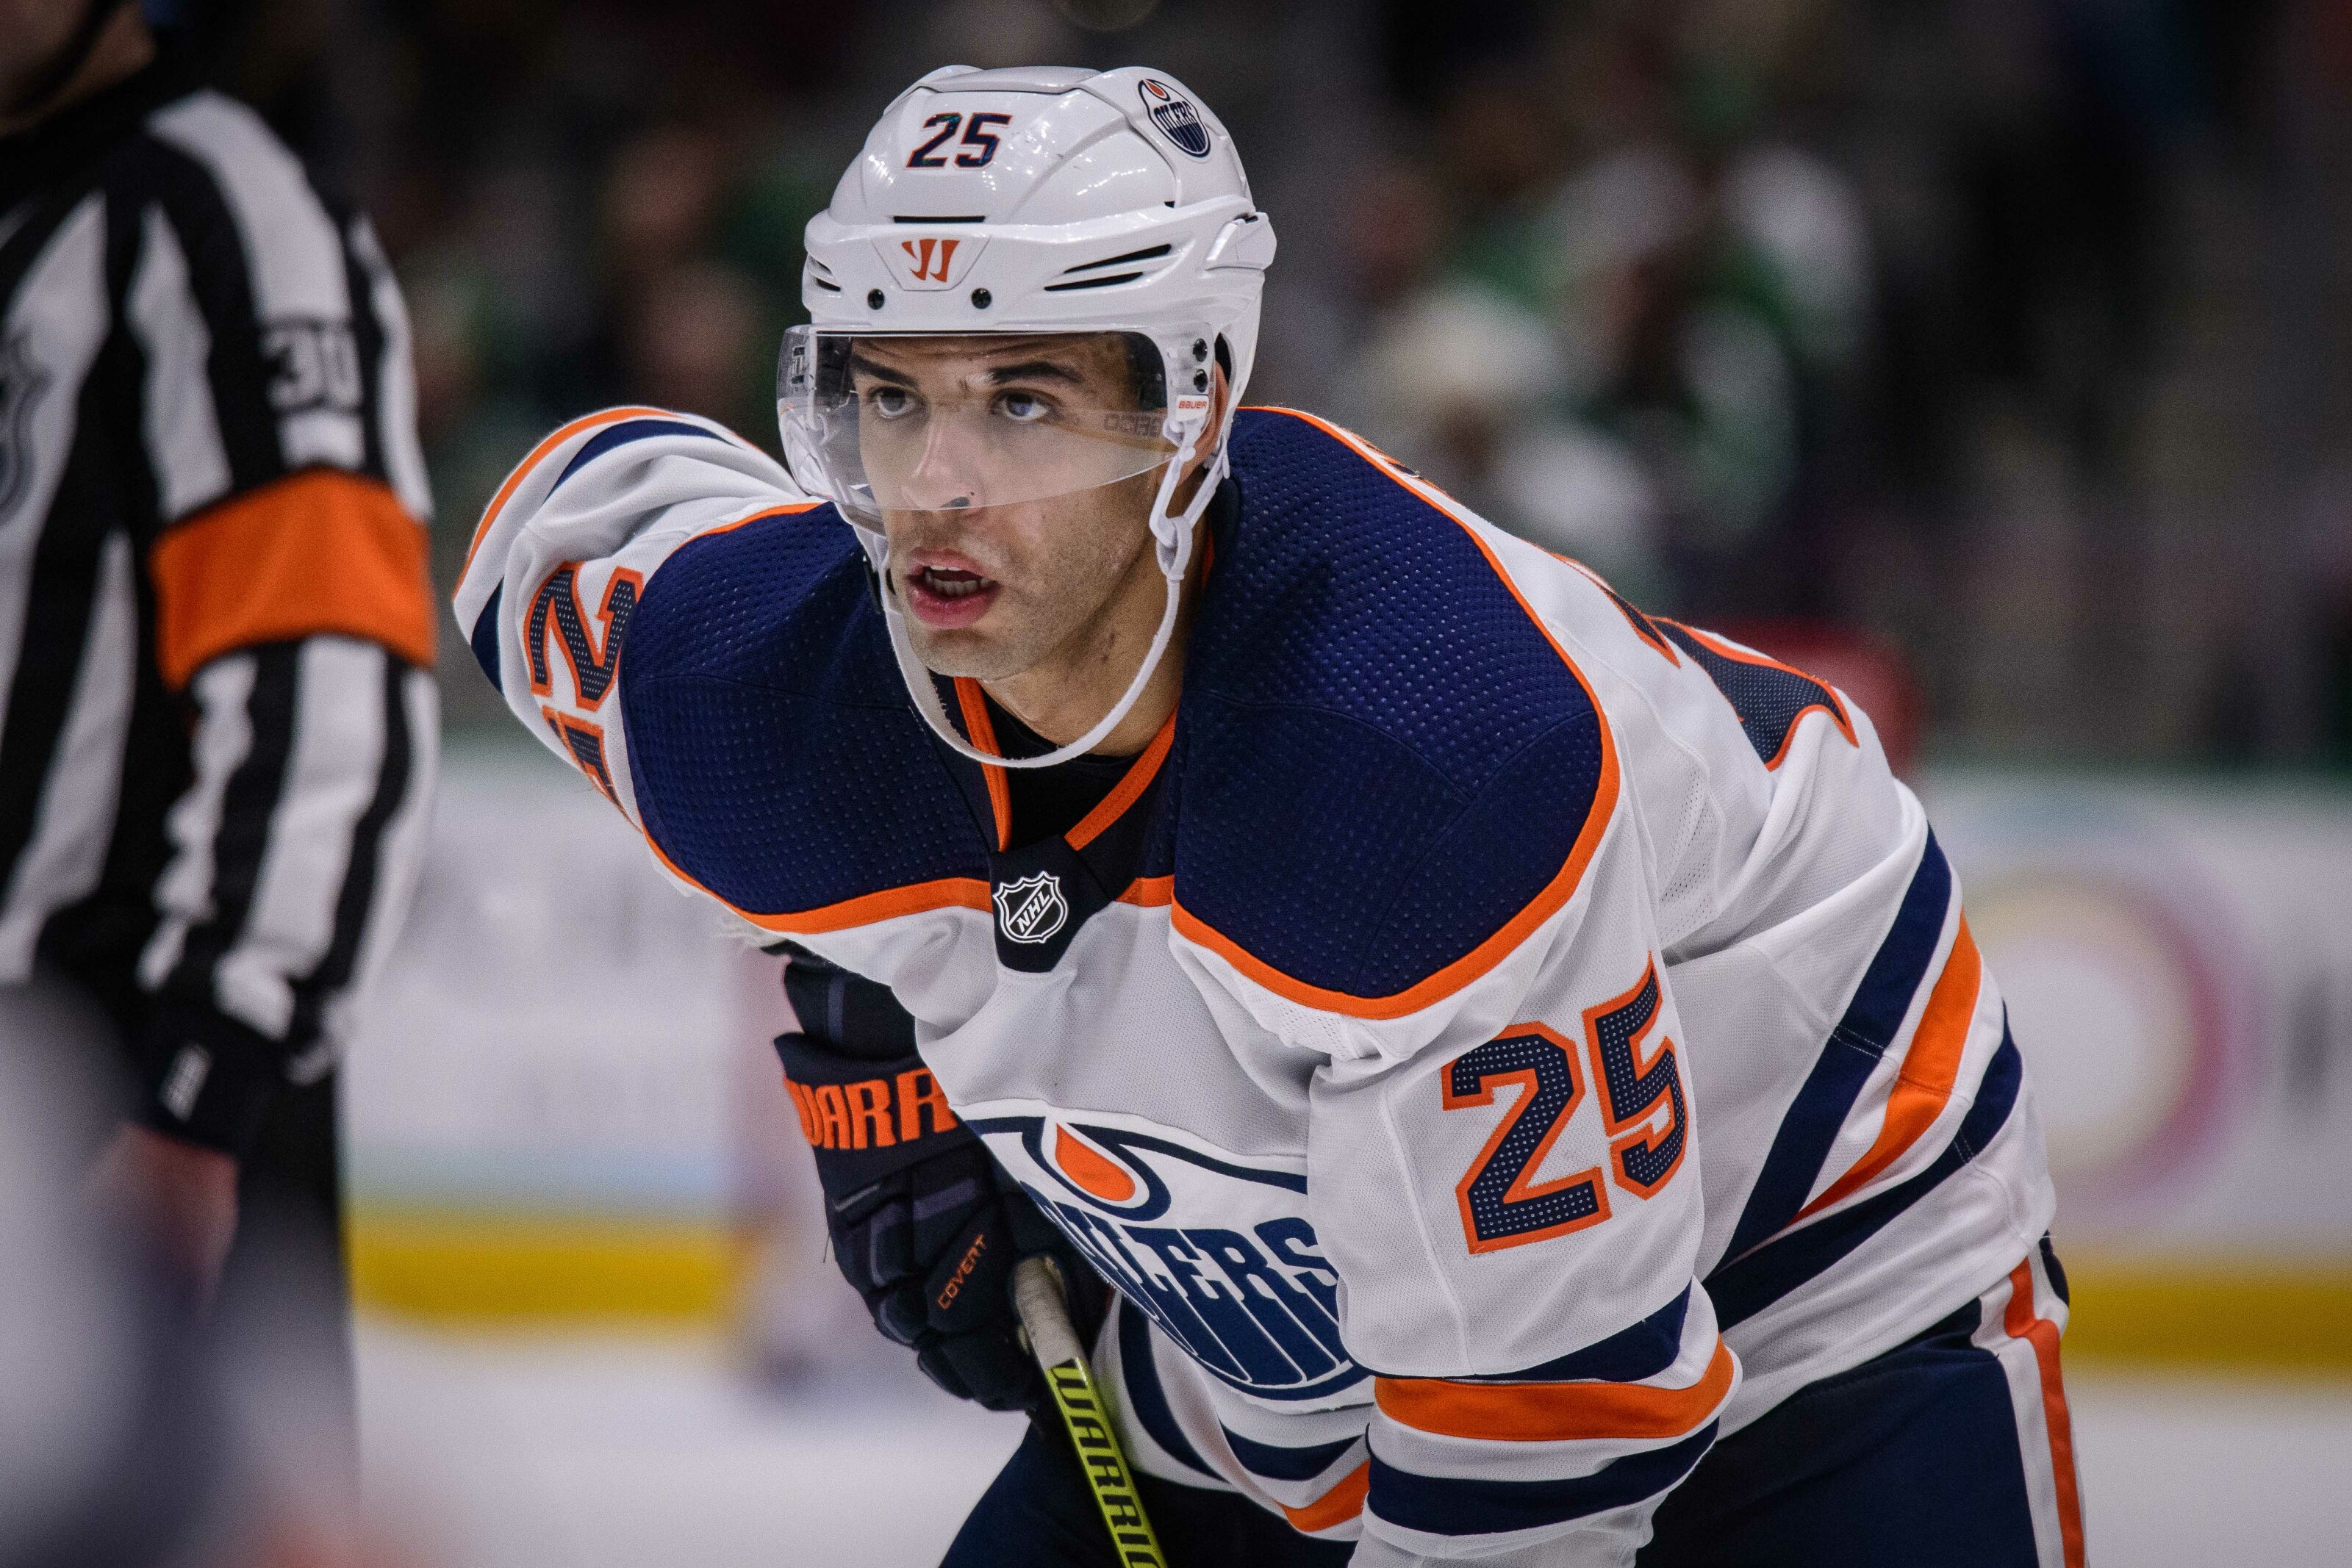 An Analysis of What the Oilers Defence Could Look like Next Season